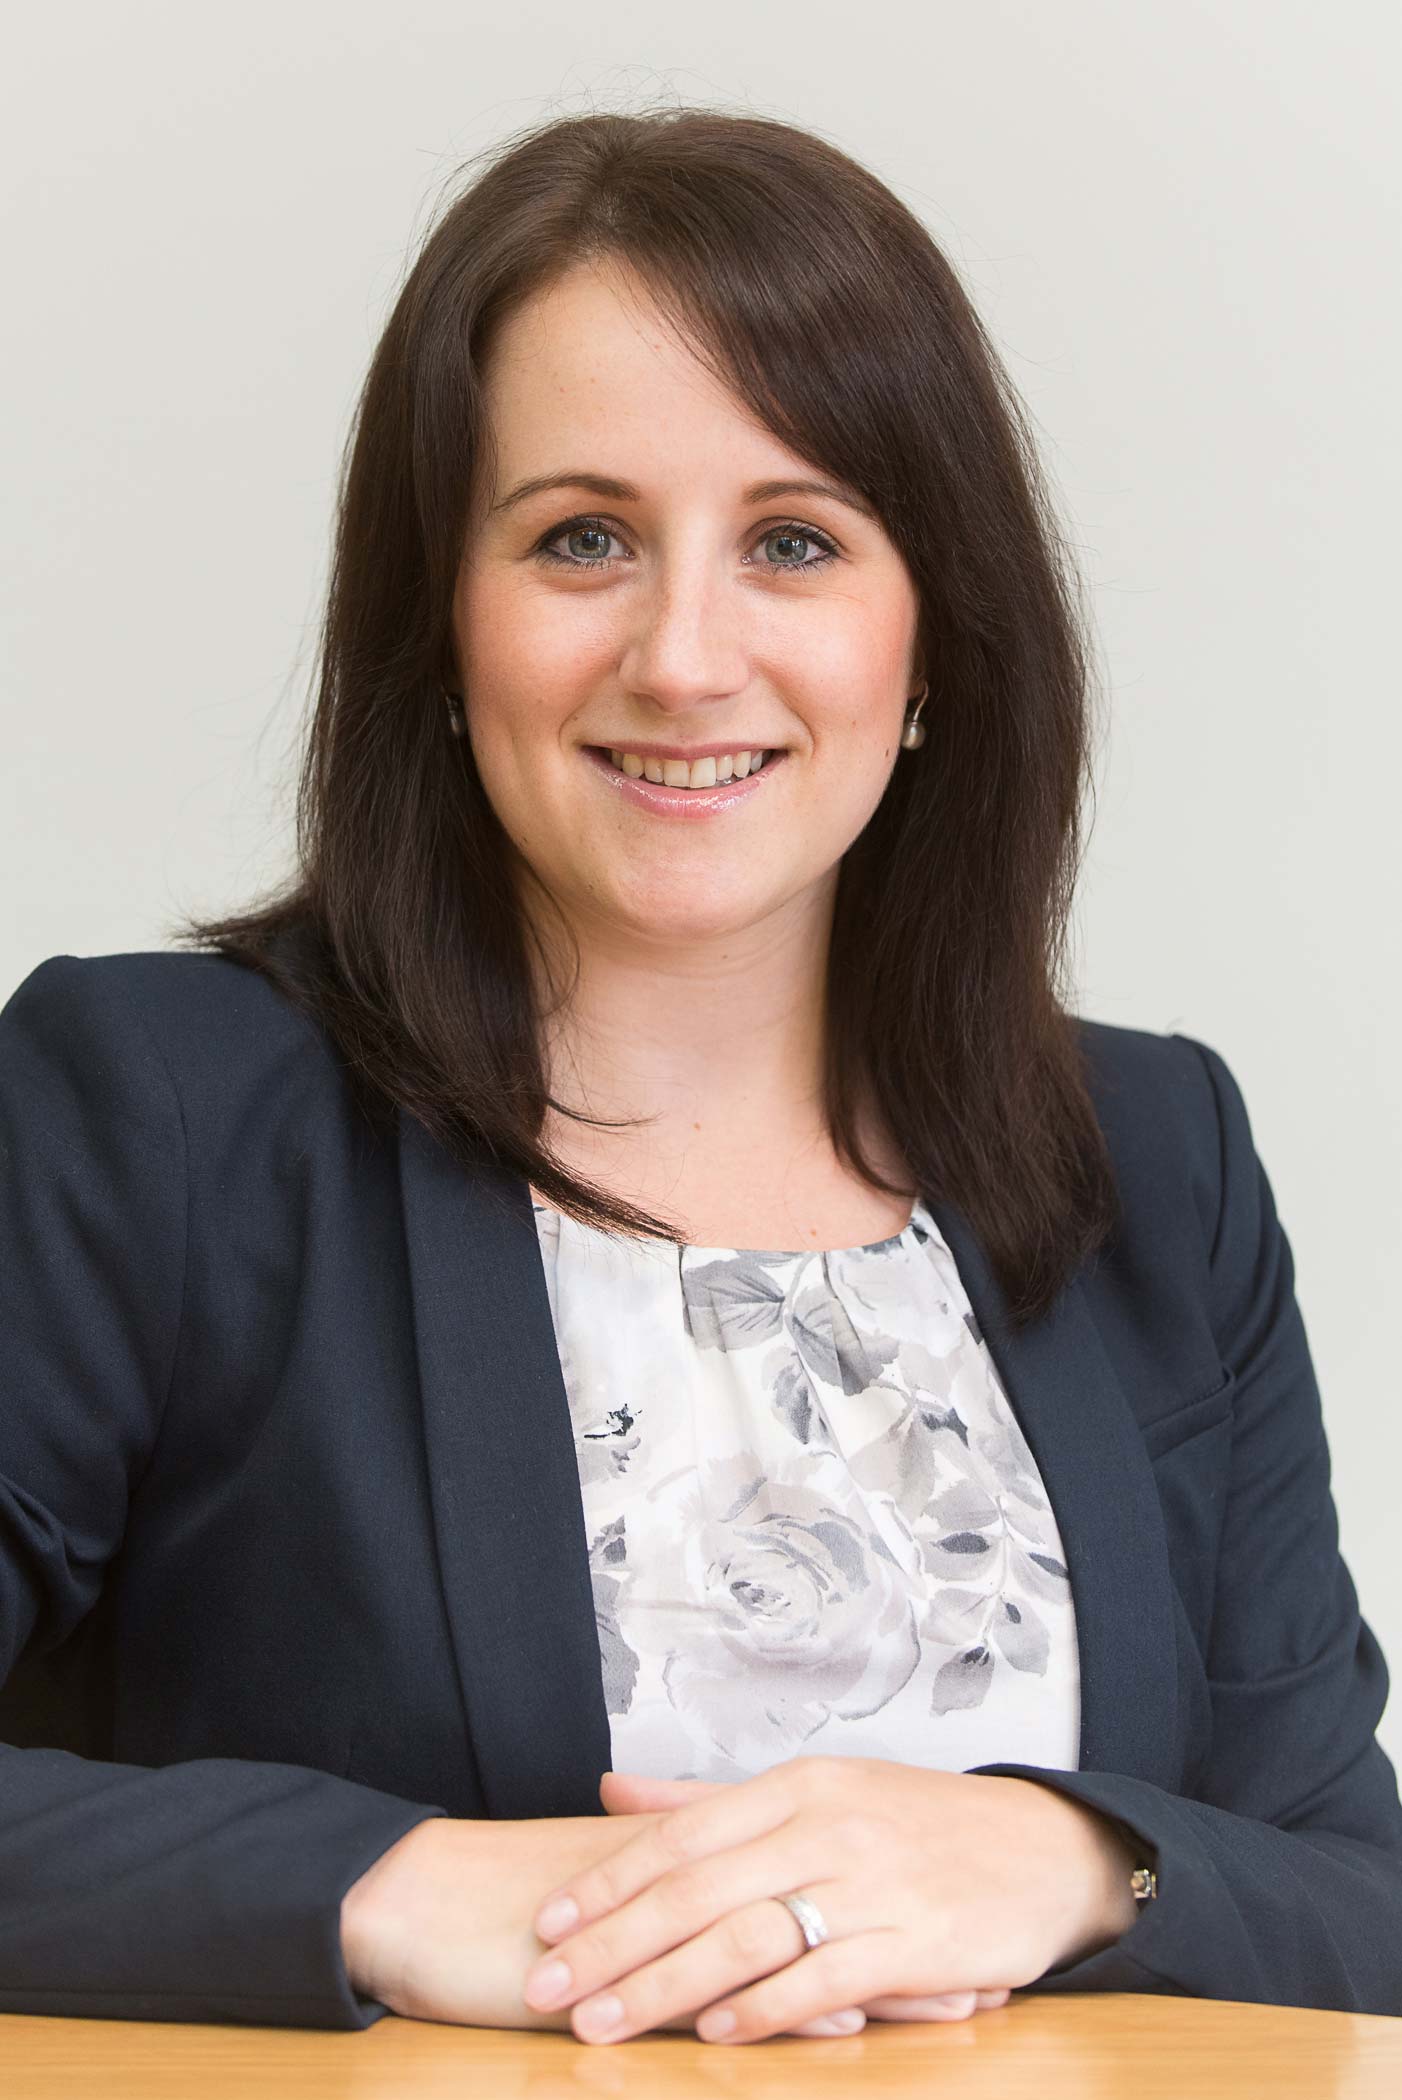 Solicitor Kayleigh Fantoni has been promoted